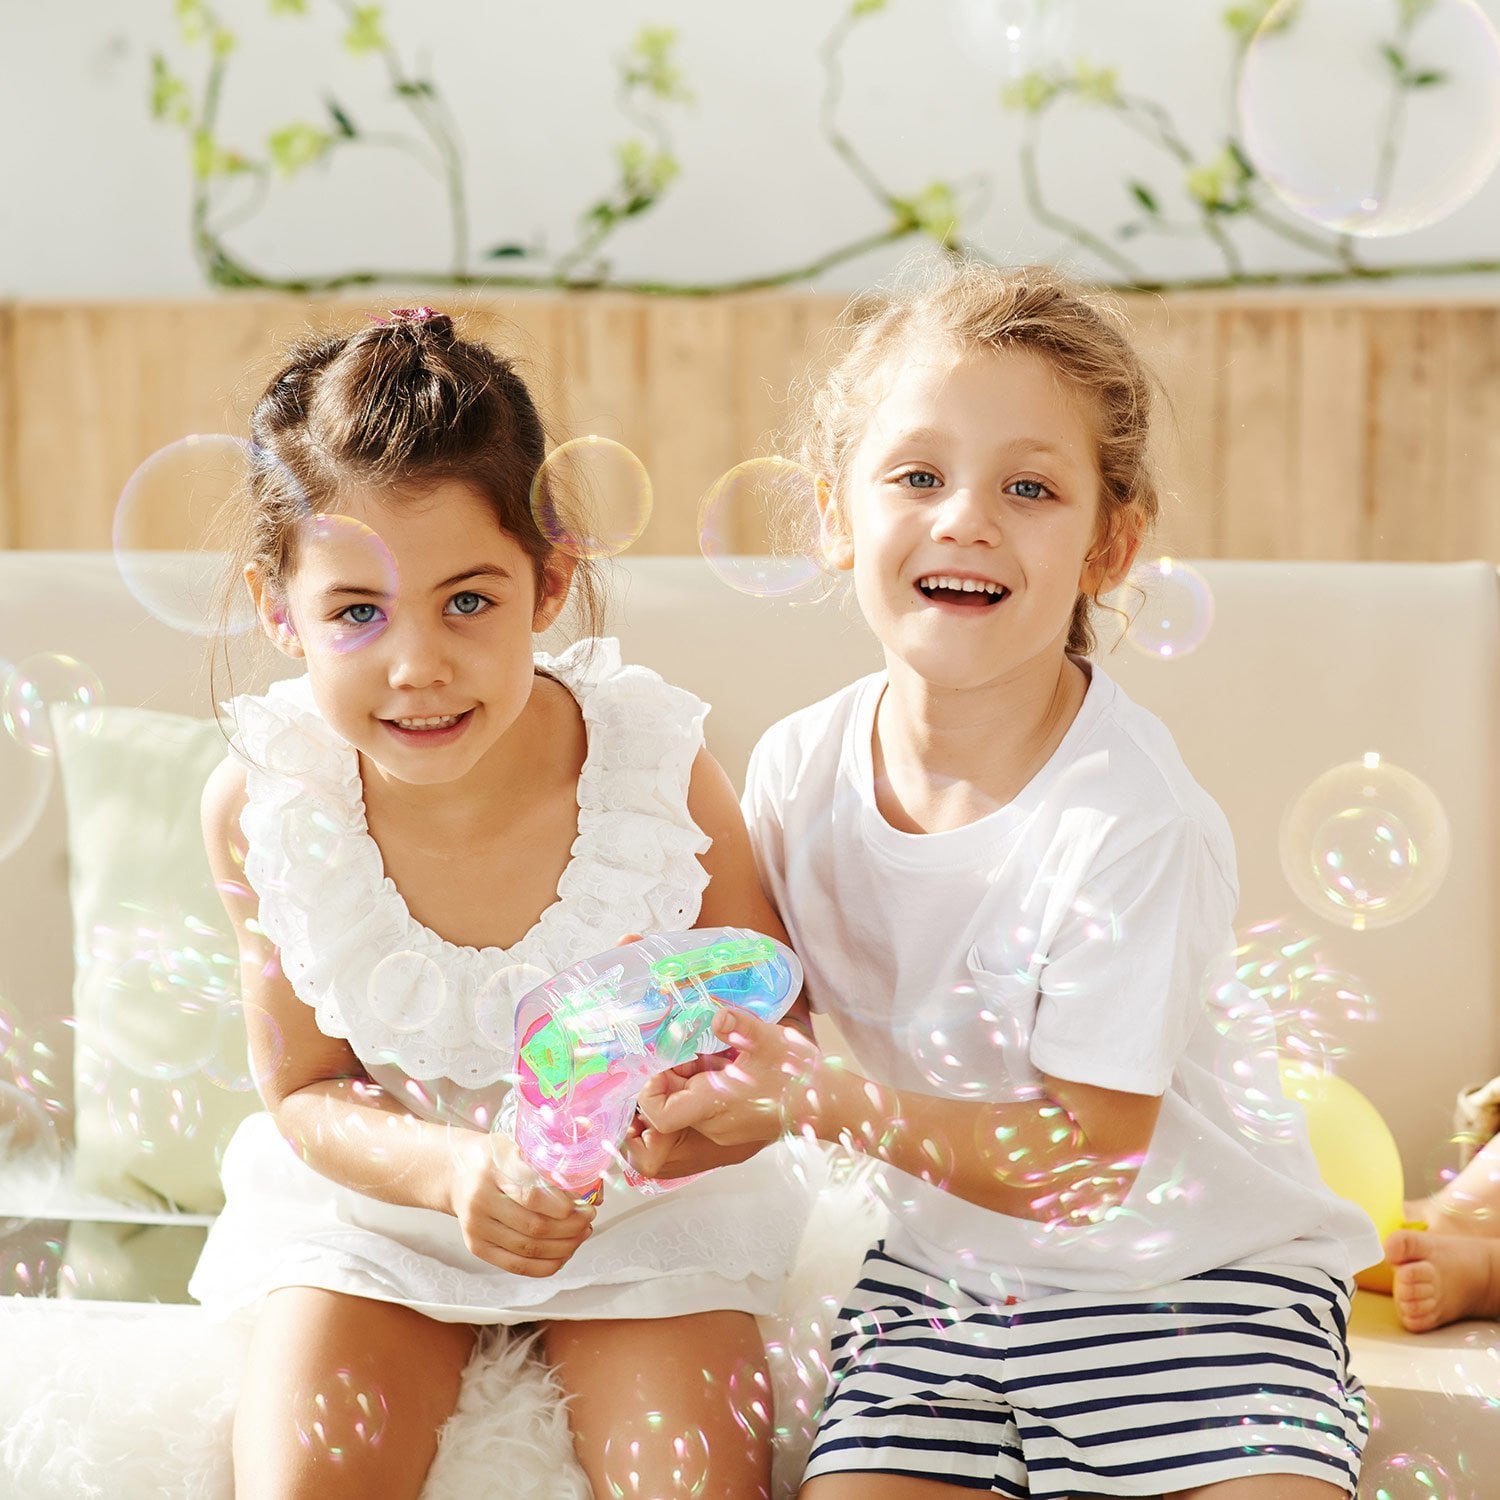 bubble toys for 3 year olds